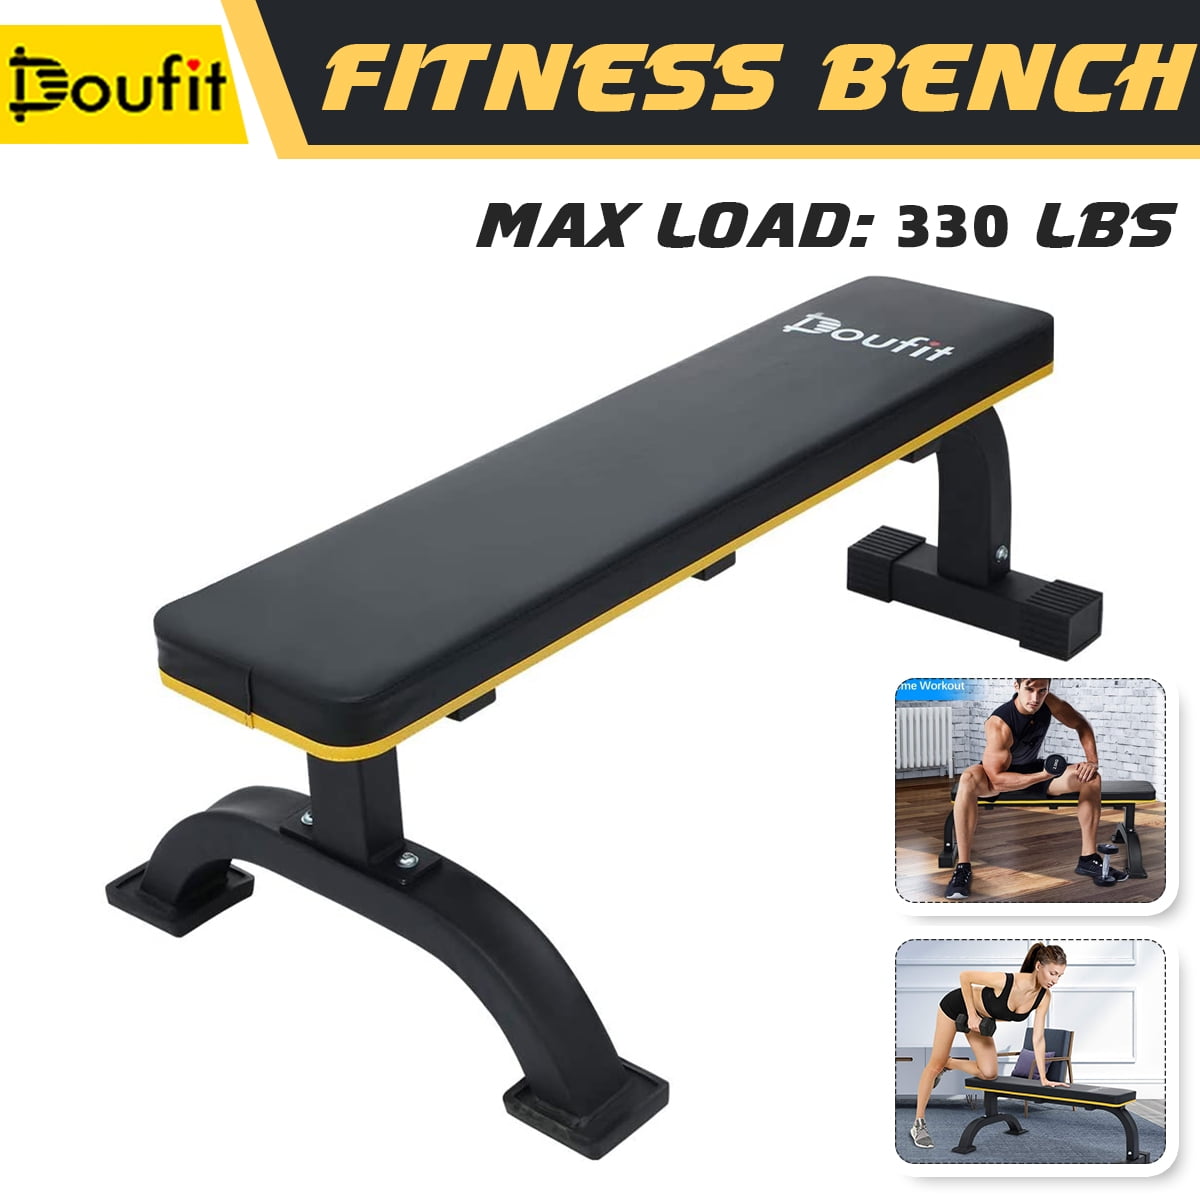 Flat Bench Workout Exercise Weightlifting Training Equipment Weight Bench for Home Gym Fitness,330lb Rated Capacity 